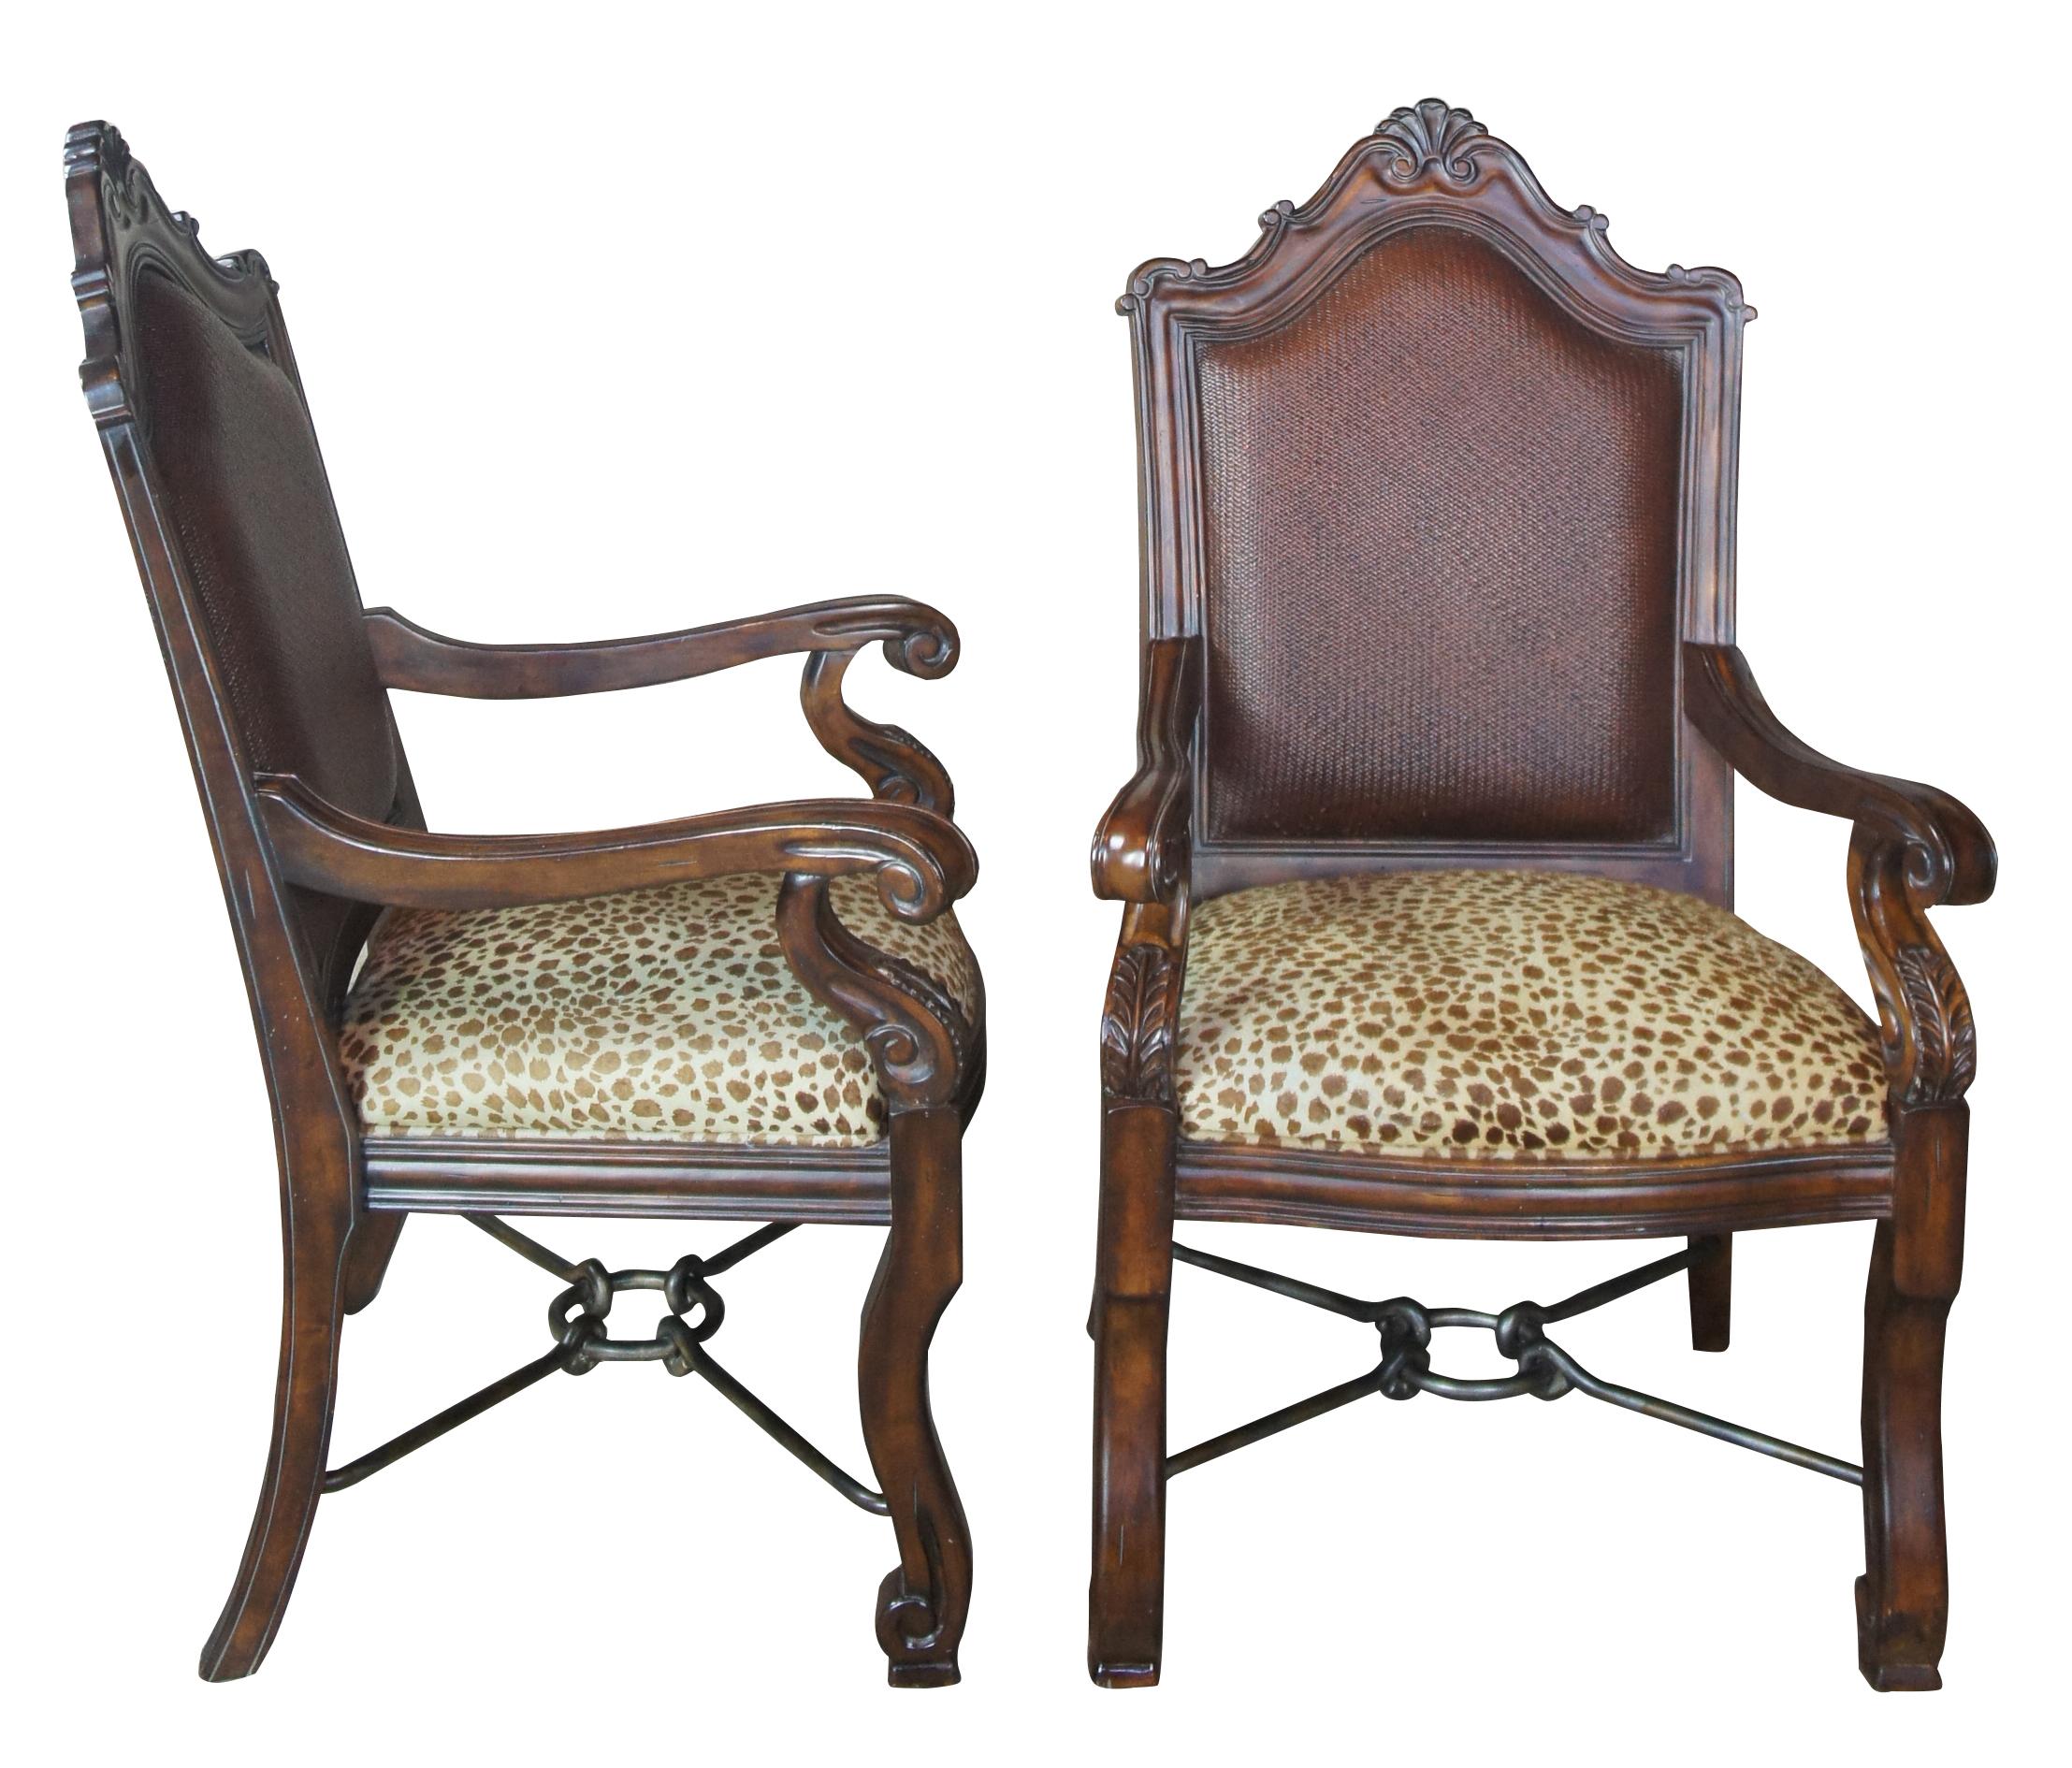 2 Thomasville Hemingway rustic old world leopard suede and rattan armchairs

Pair of Thomasville armchairs, part of the Hemingway collection. Features an old world Italian styling with scrolled acanthus carved arms, a rattan back and iron